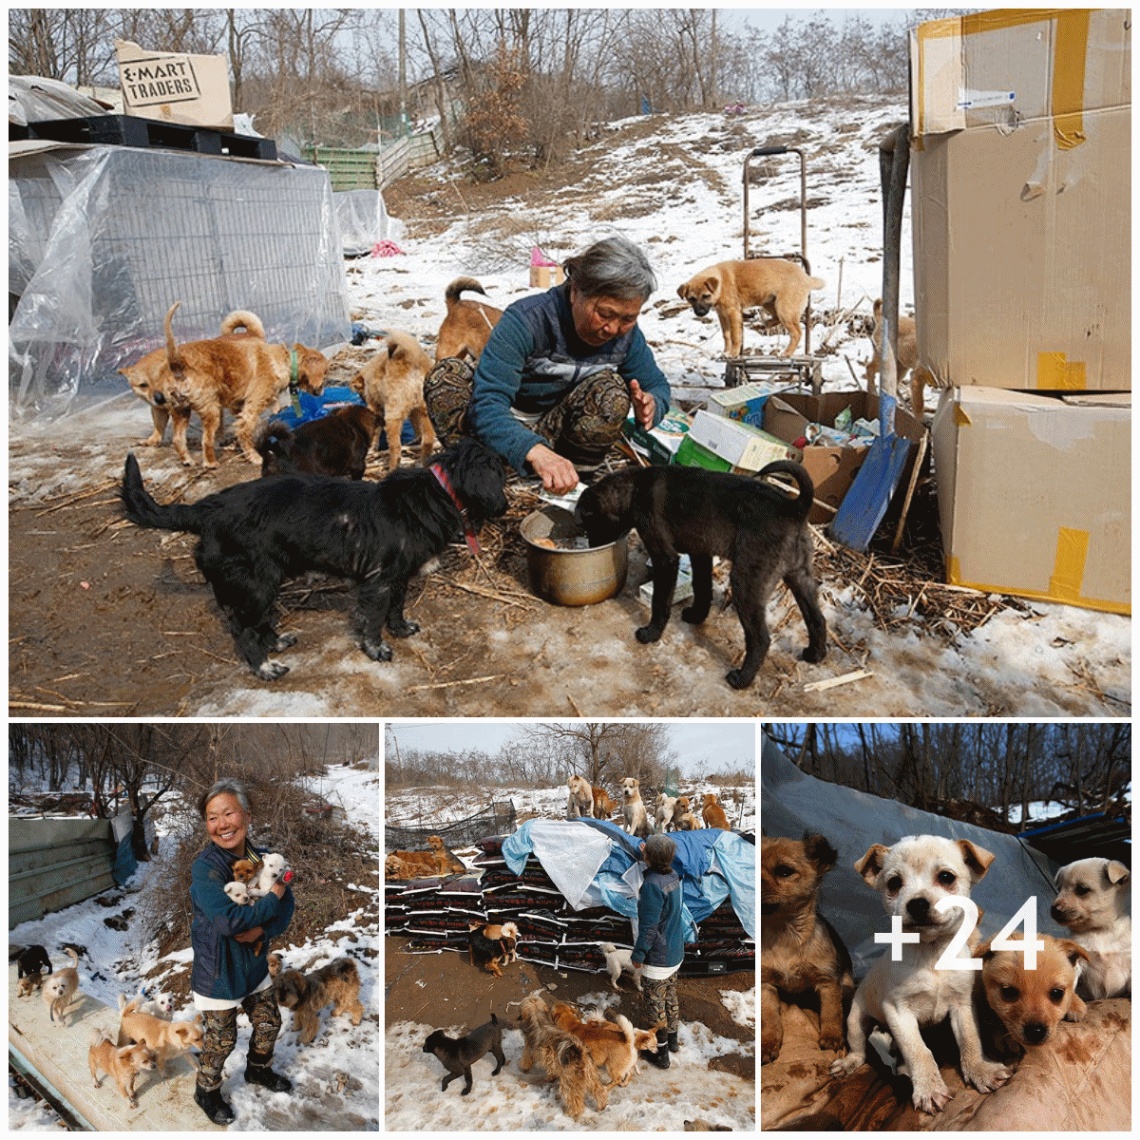 Unwavering Devotion: 60-Year-Old Woman Cares for and Takes in Hundreds of Stray Dogs Over the Years